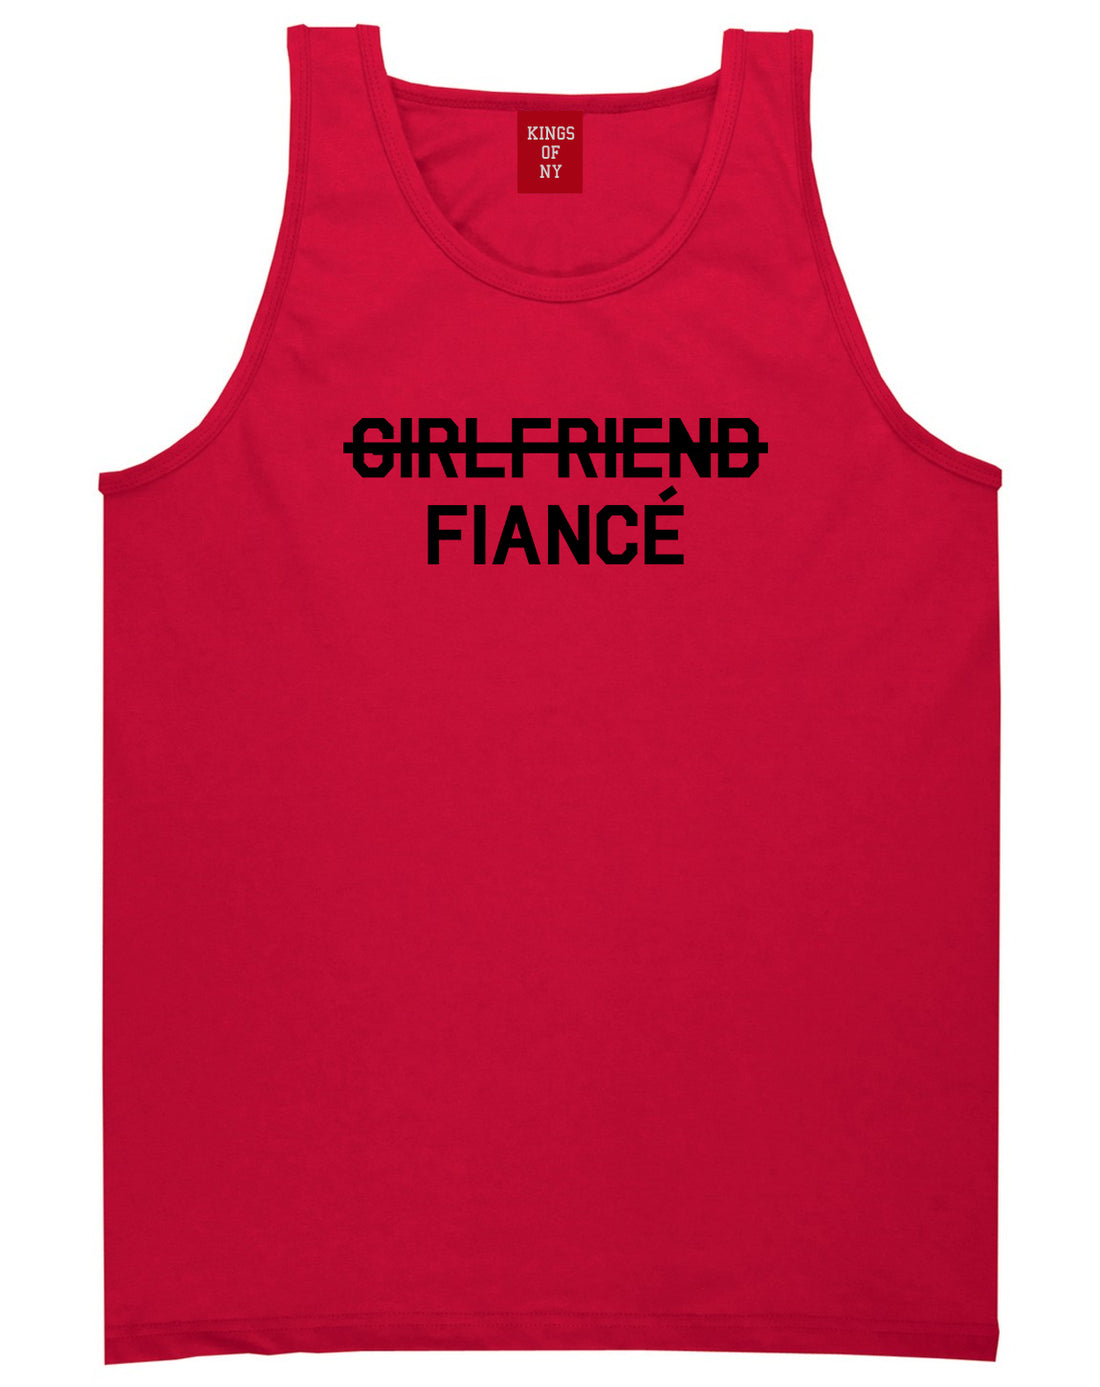 Girlfriend Fiance Engagement Mens Red Tank Top Shirt by KINGS OF NY